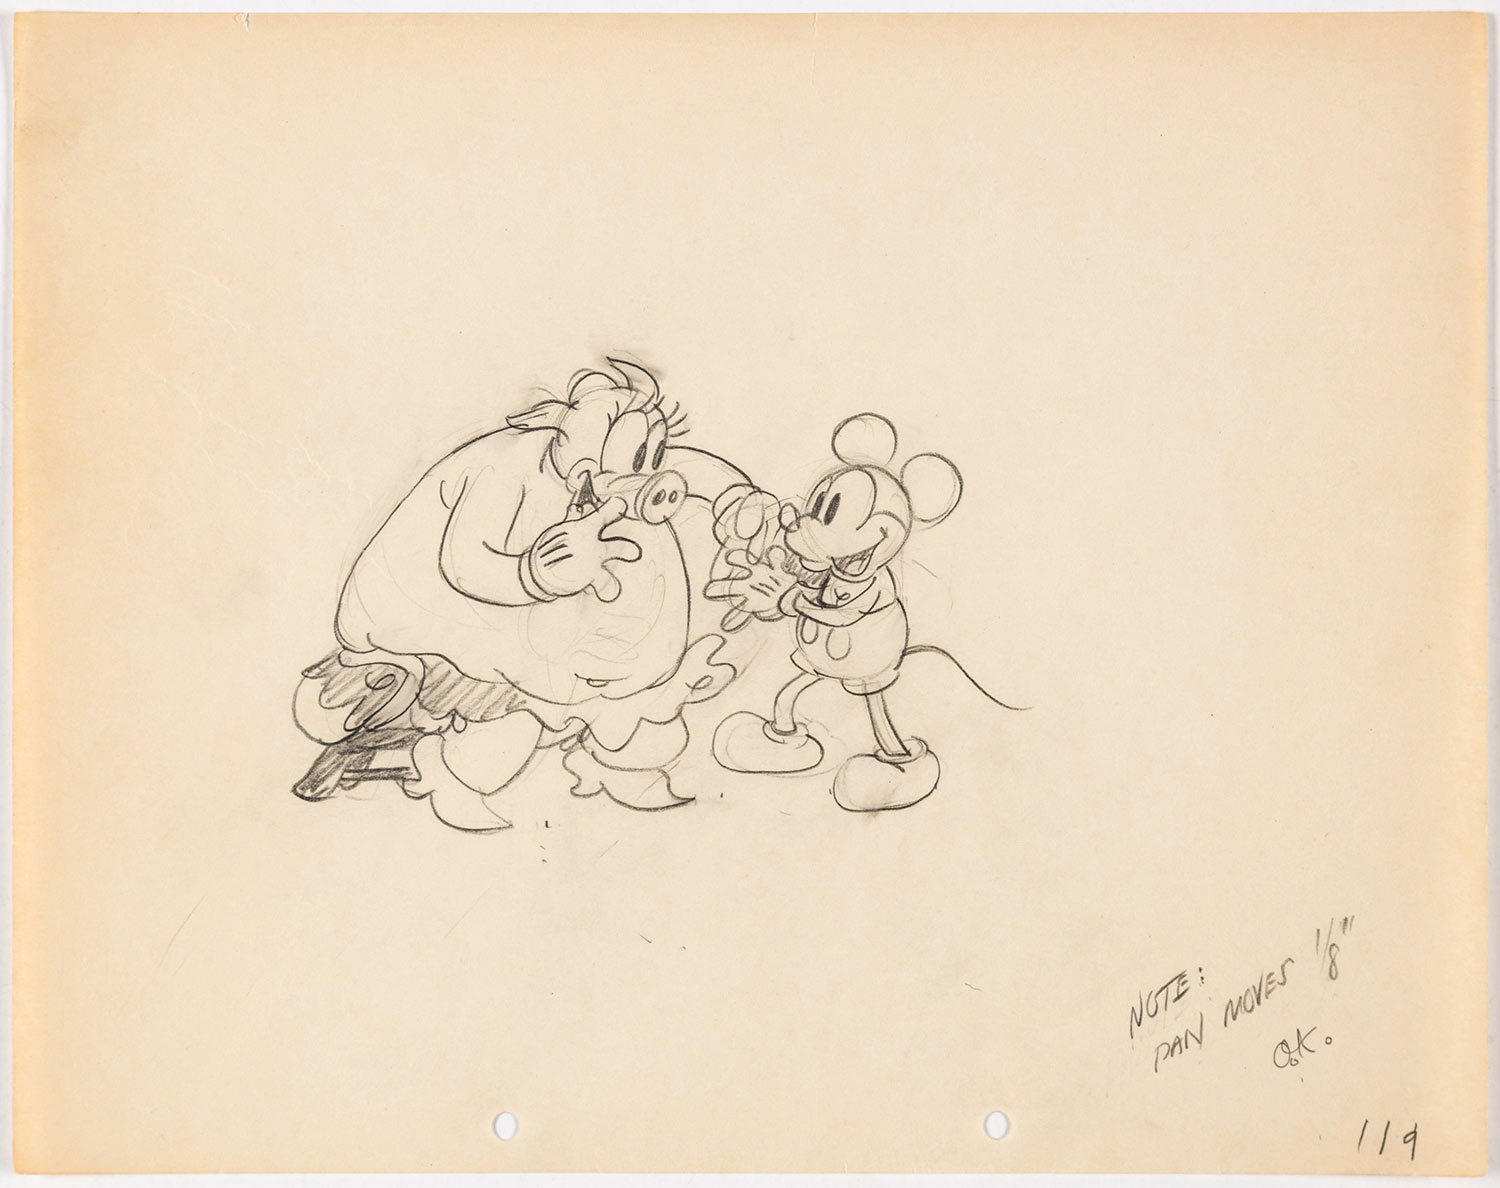 walt disney sketches of mickey mouse